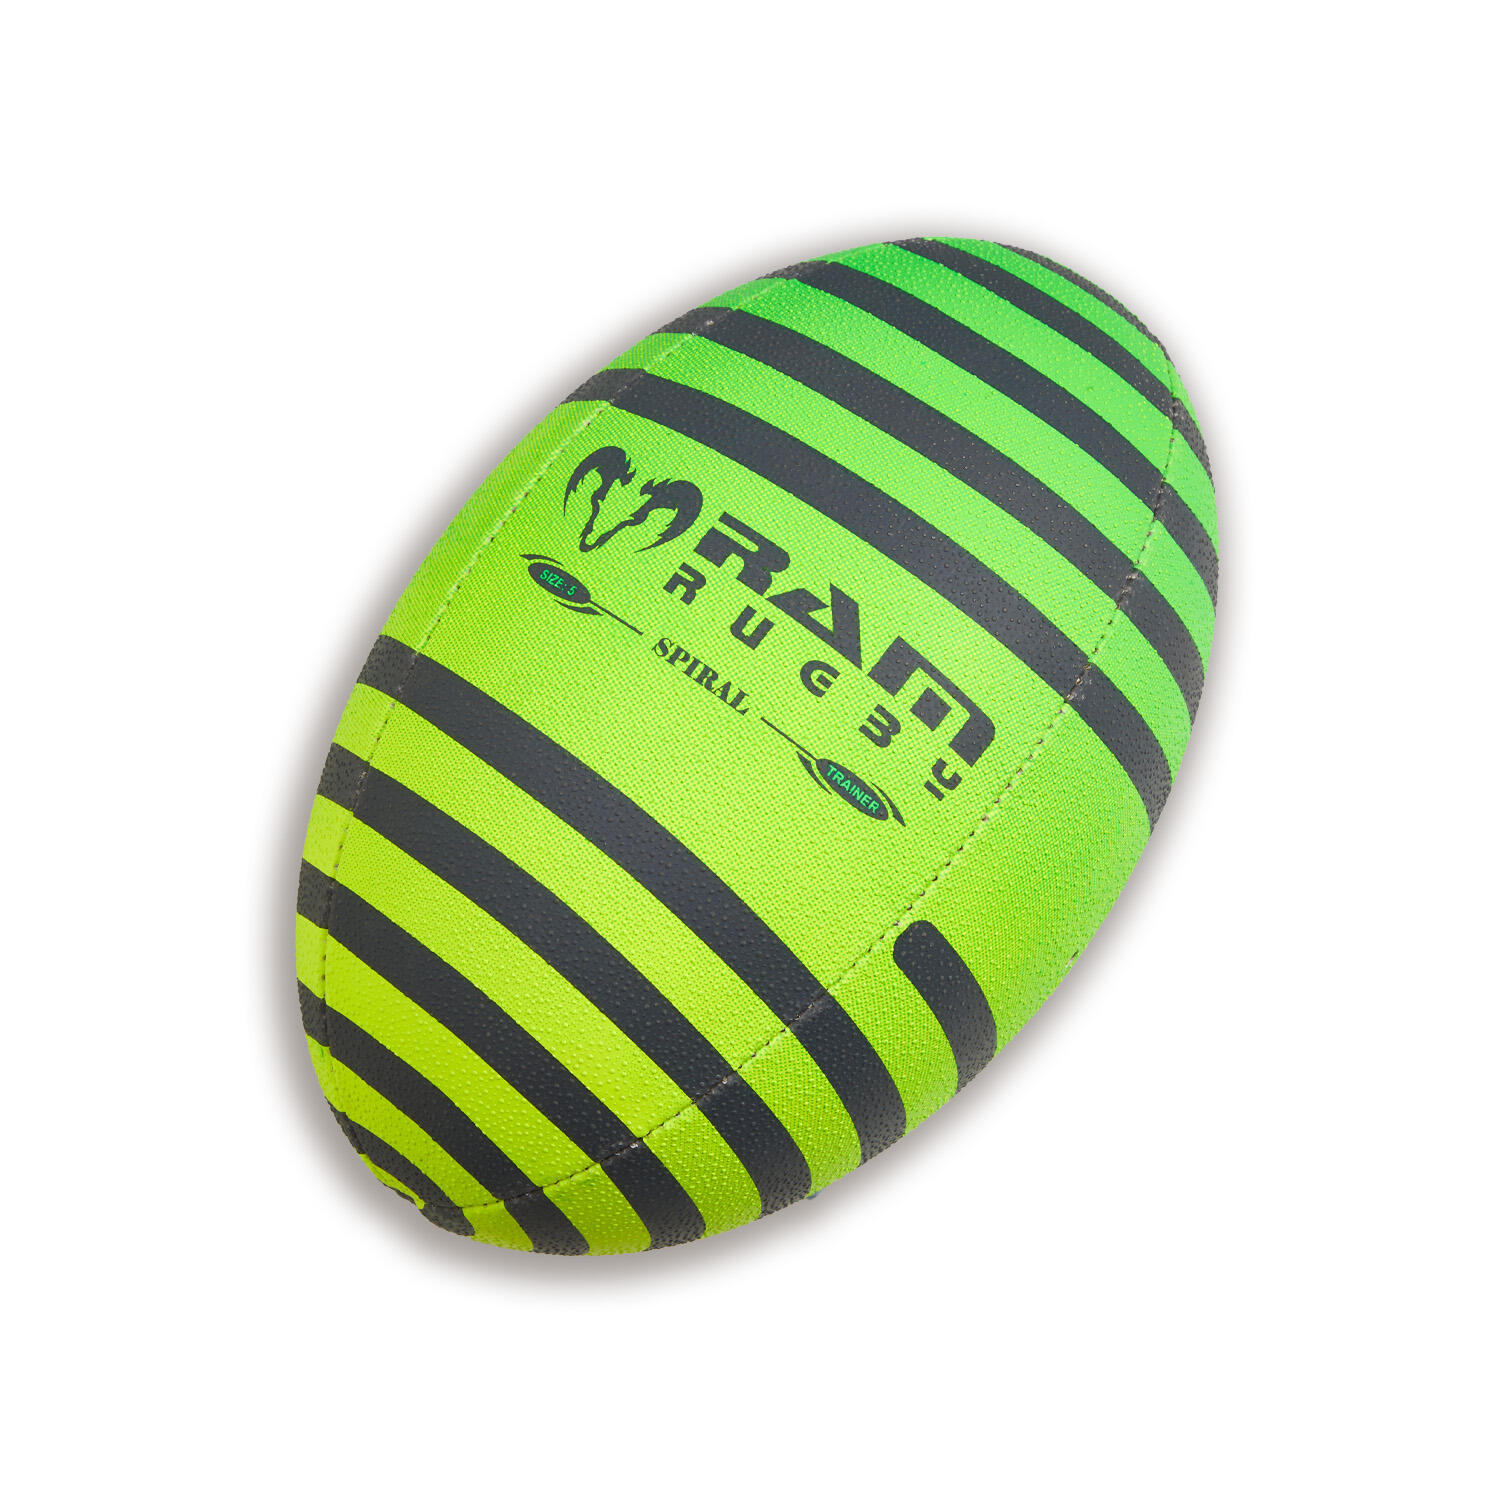 Ram Rugby Ball - Squad - Trainer - (Size 4) - Spiral 3/6